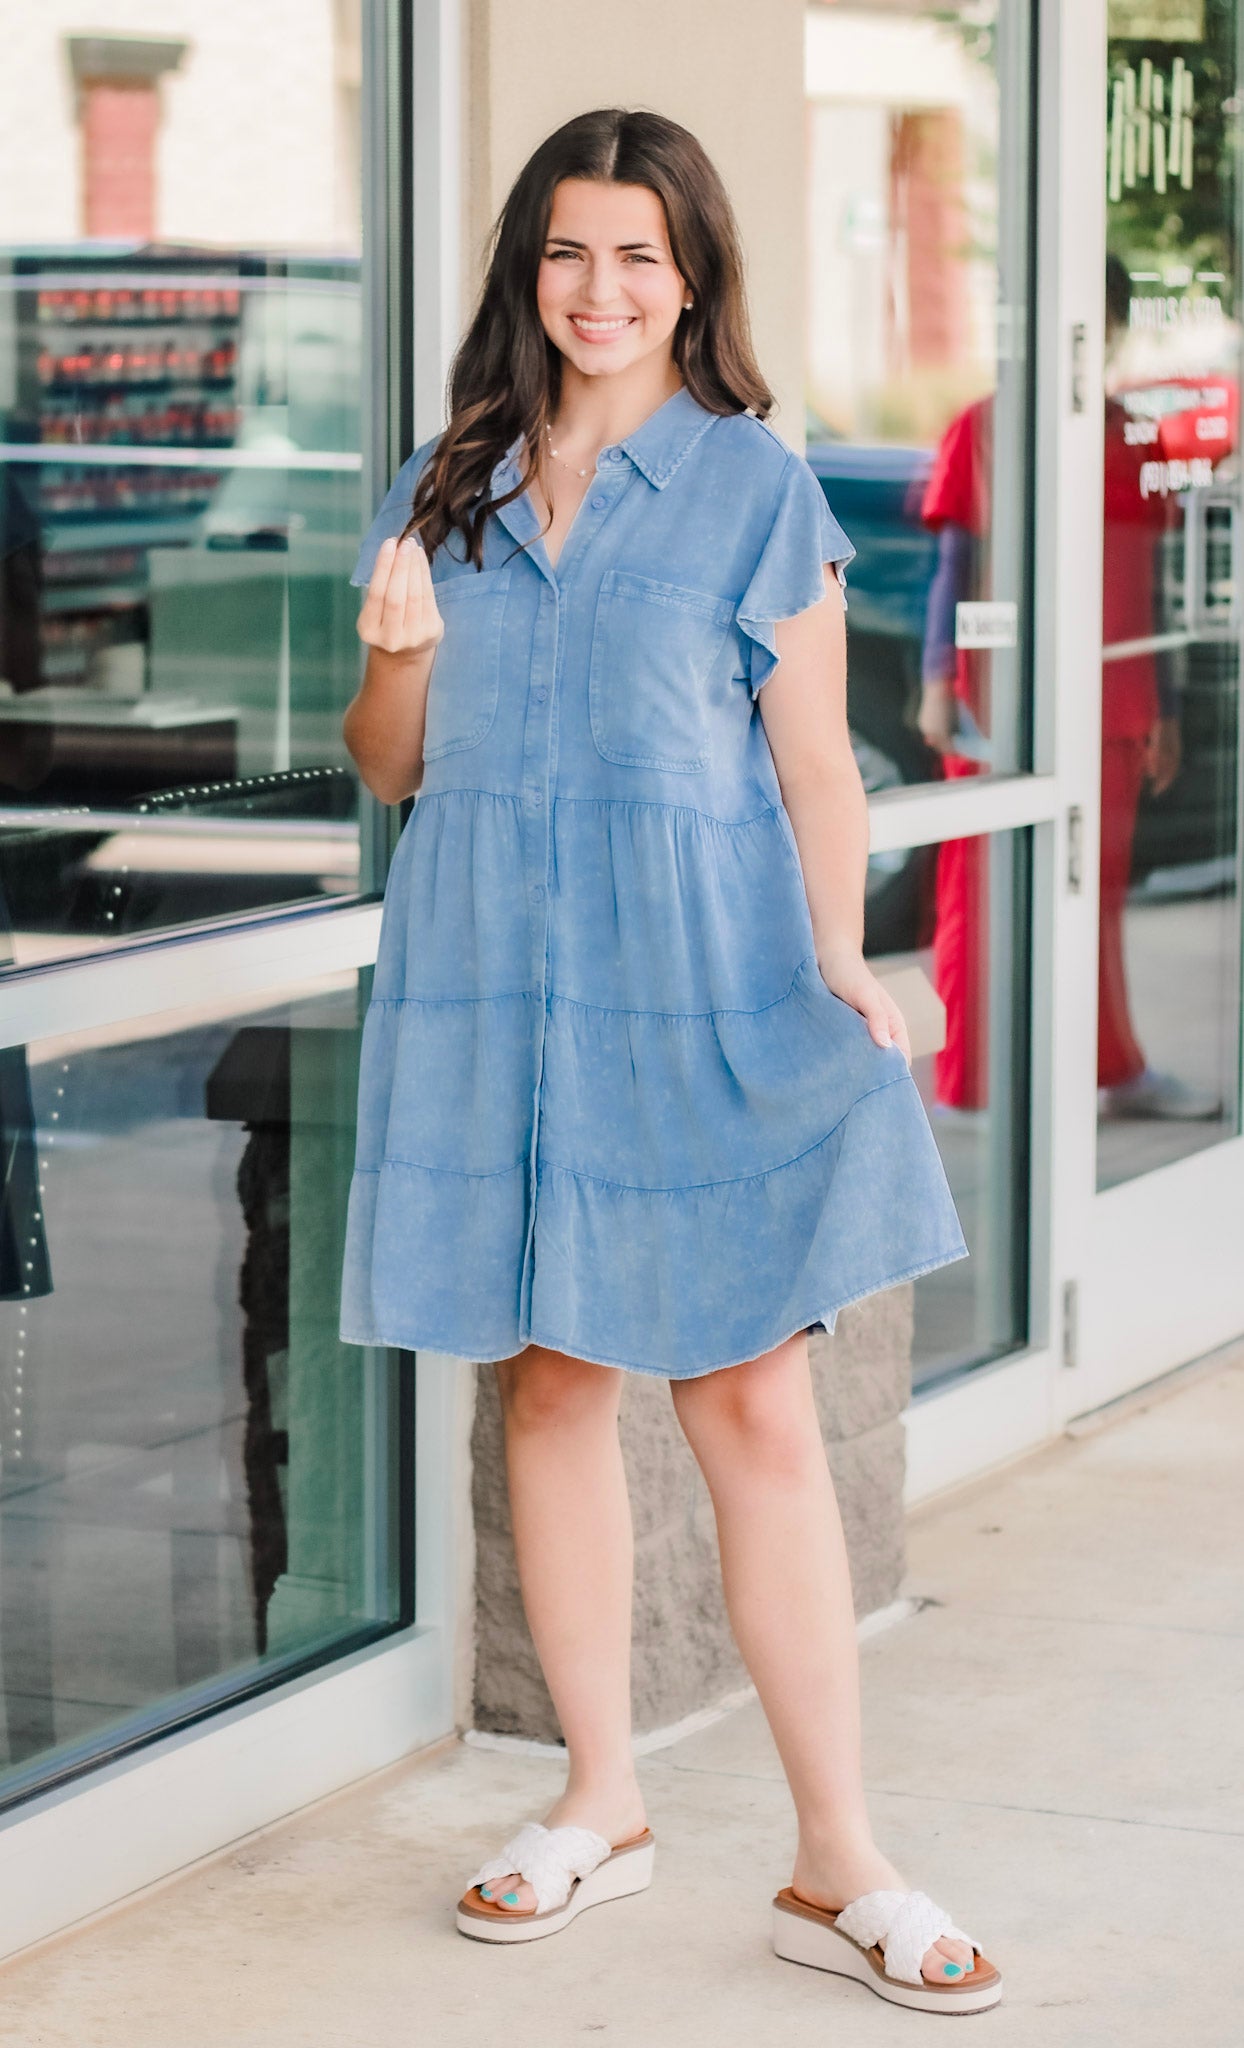 Under the Willow Tree Denim Washed Dress - Allure Clothing Boutique